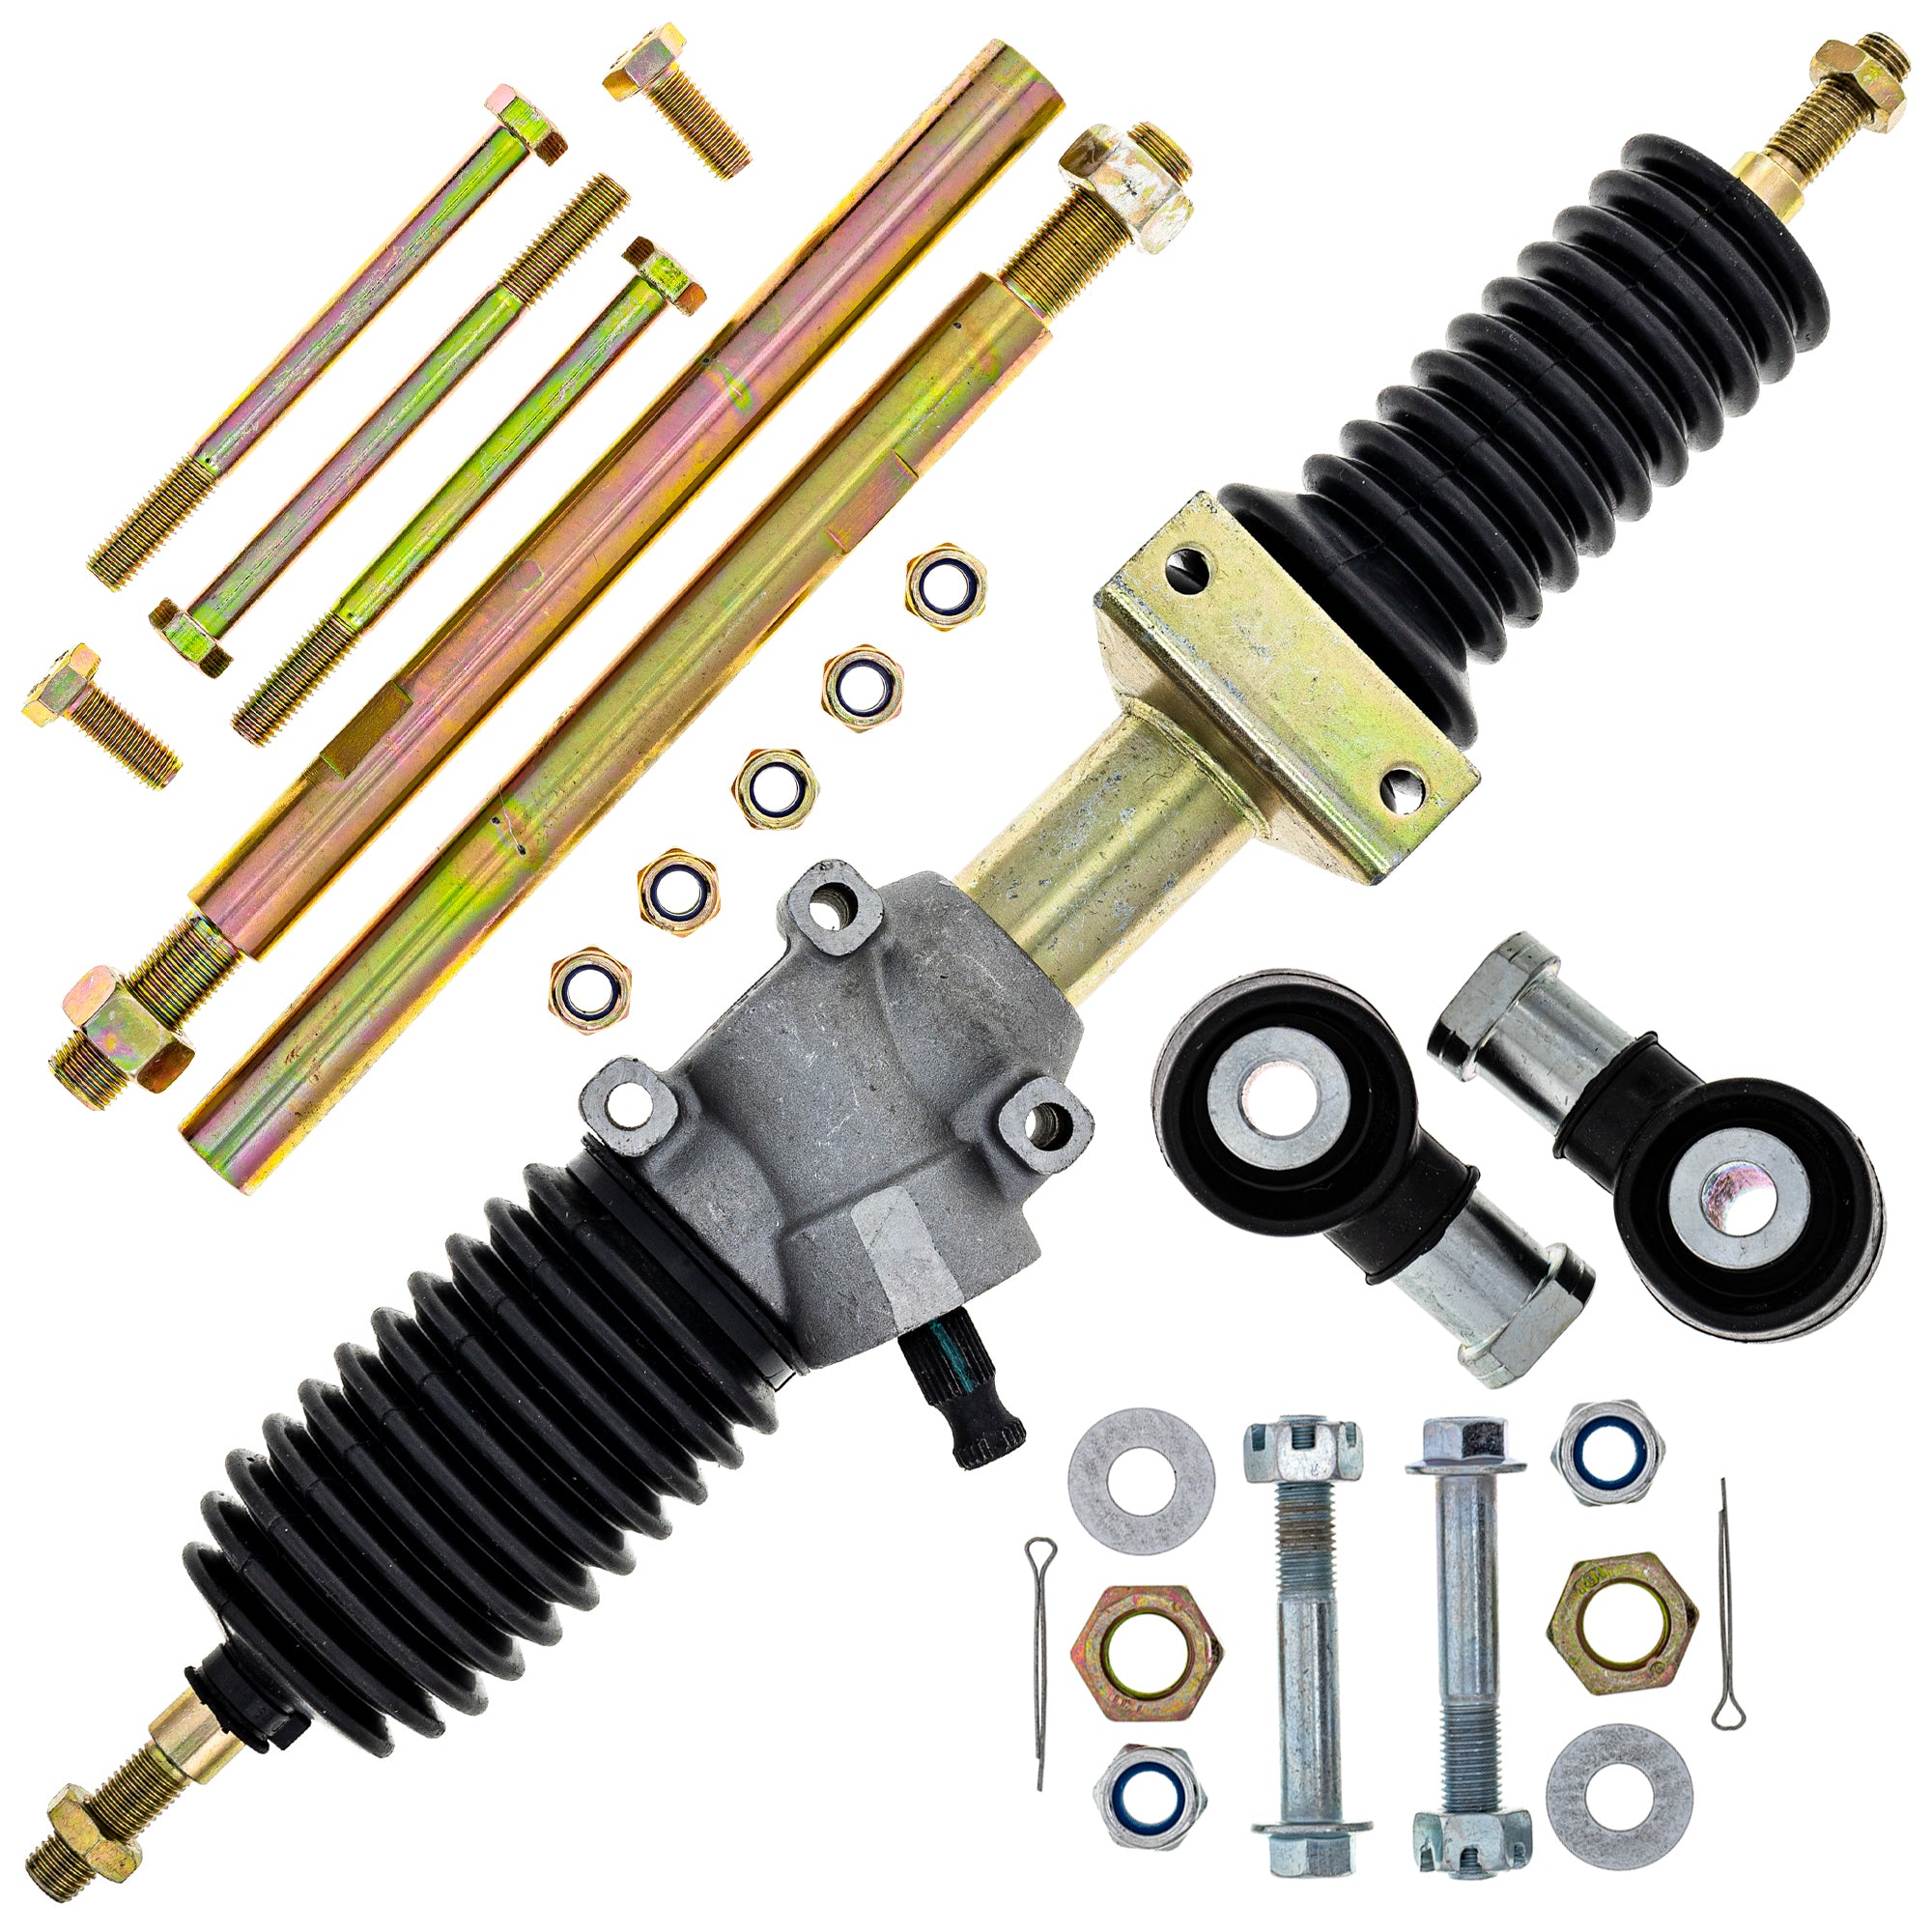 Steering Rack Assembly & Tie Rods Kit for Polaris RZR NICHE MK1009518